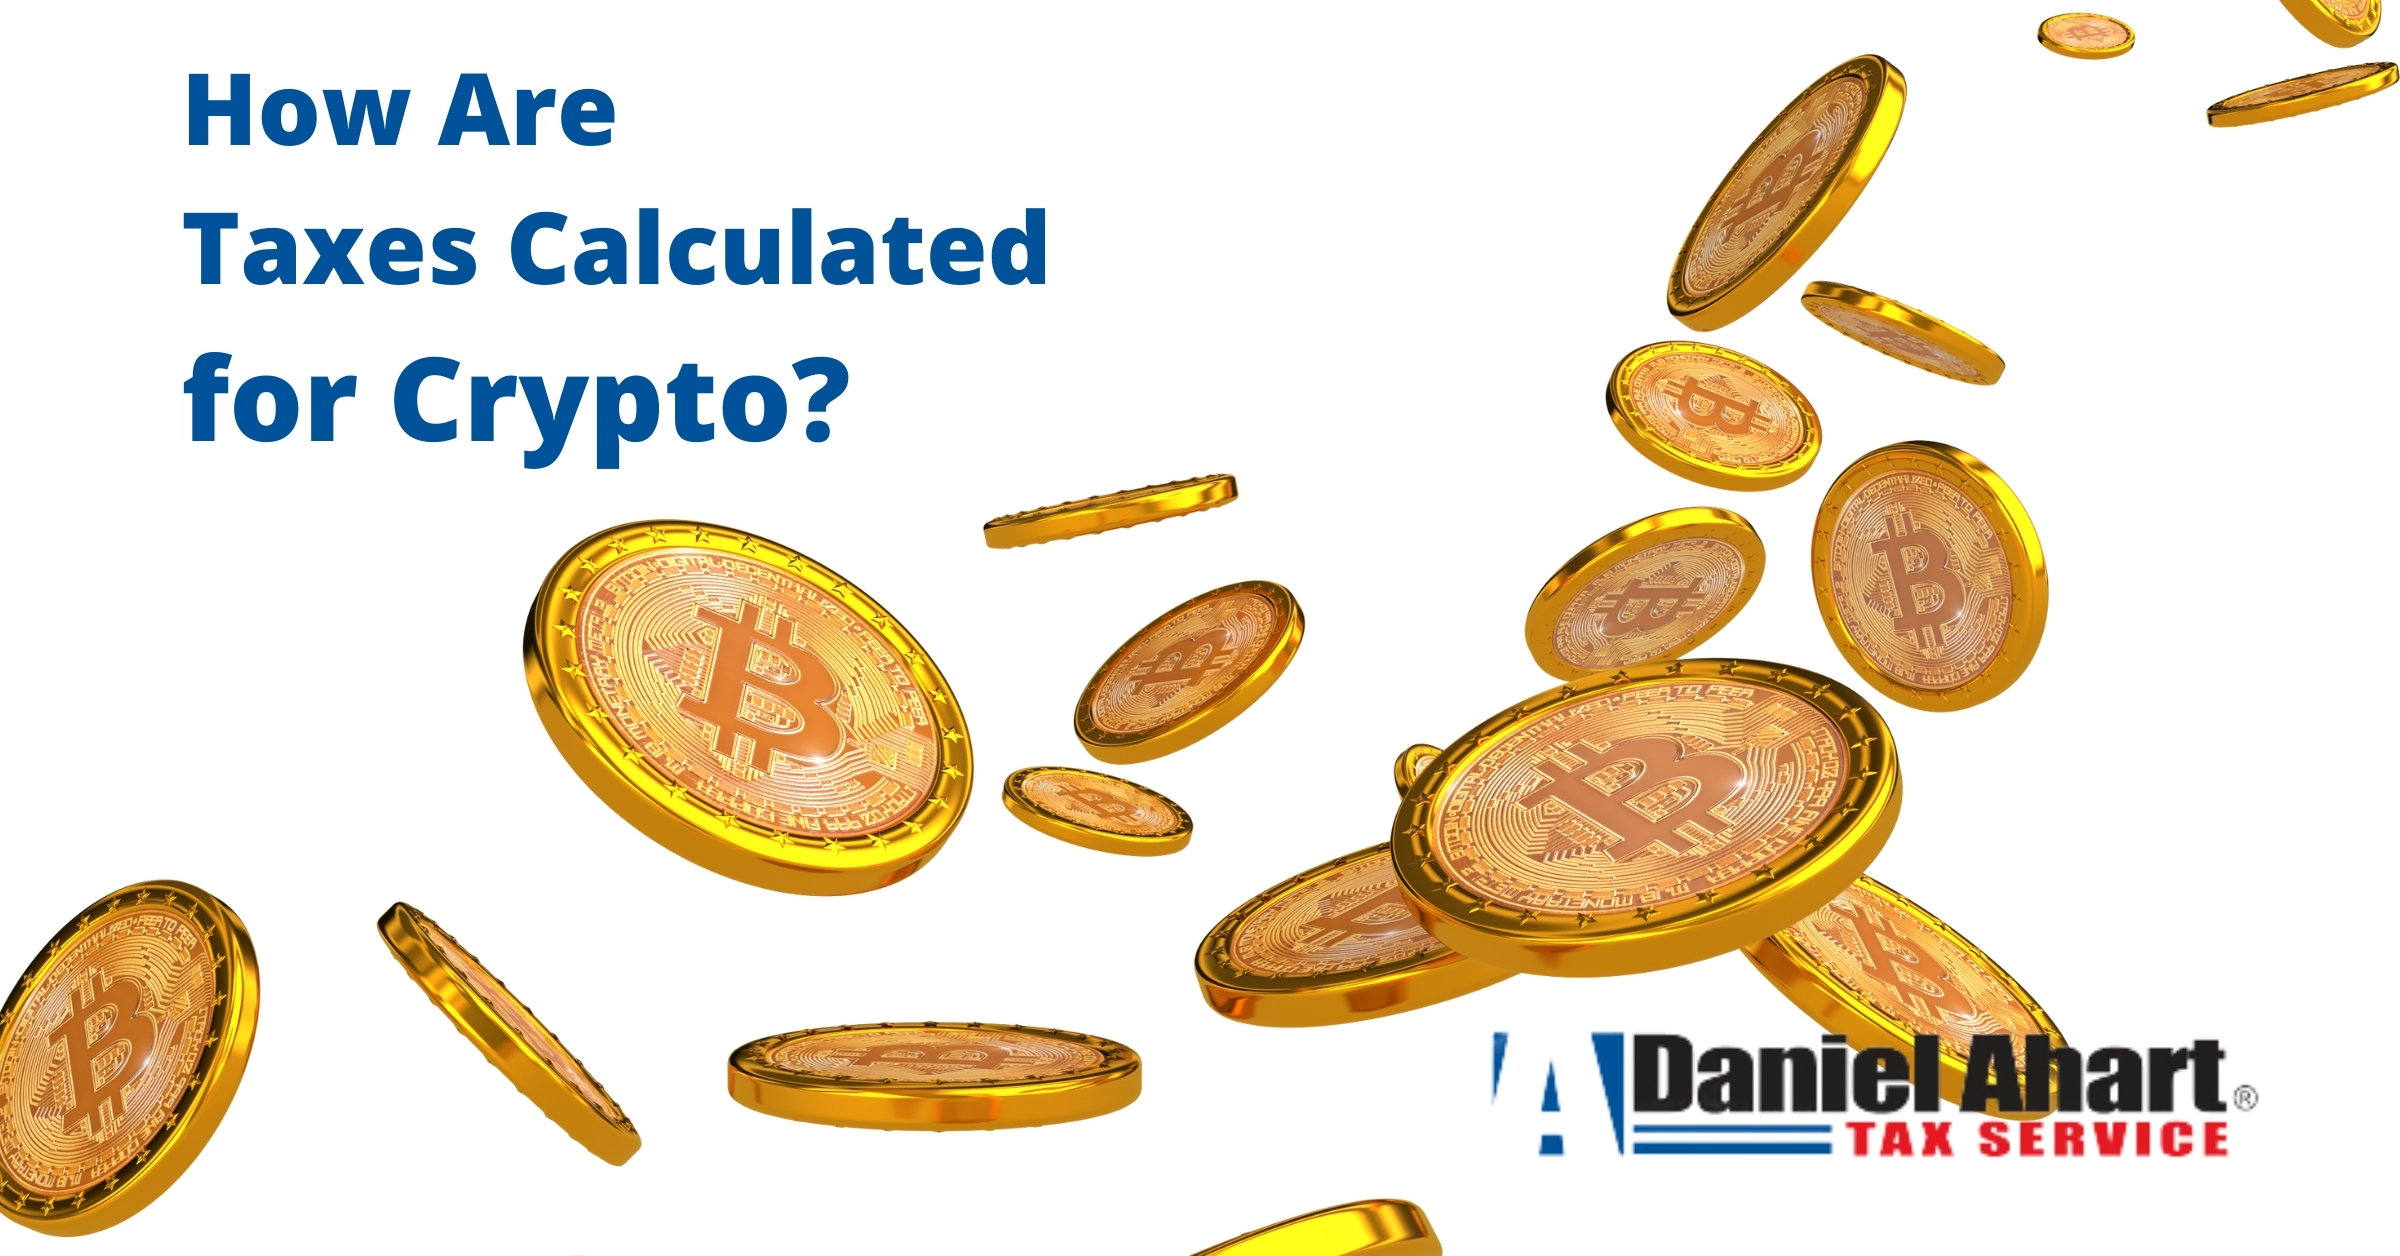 How Are Taxes Calculated for Crypto?